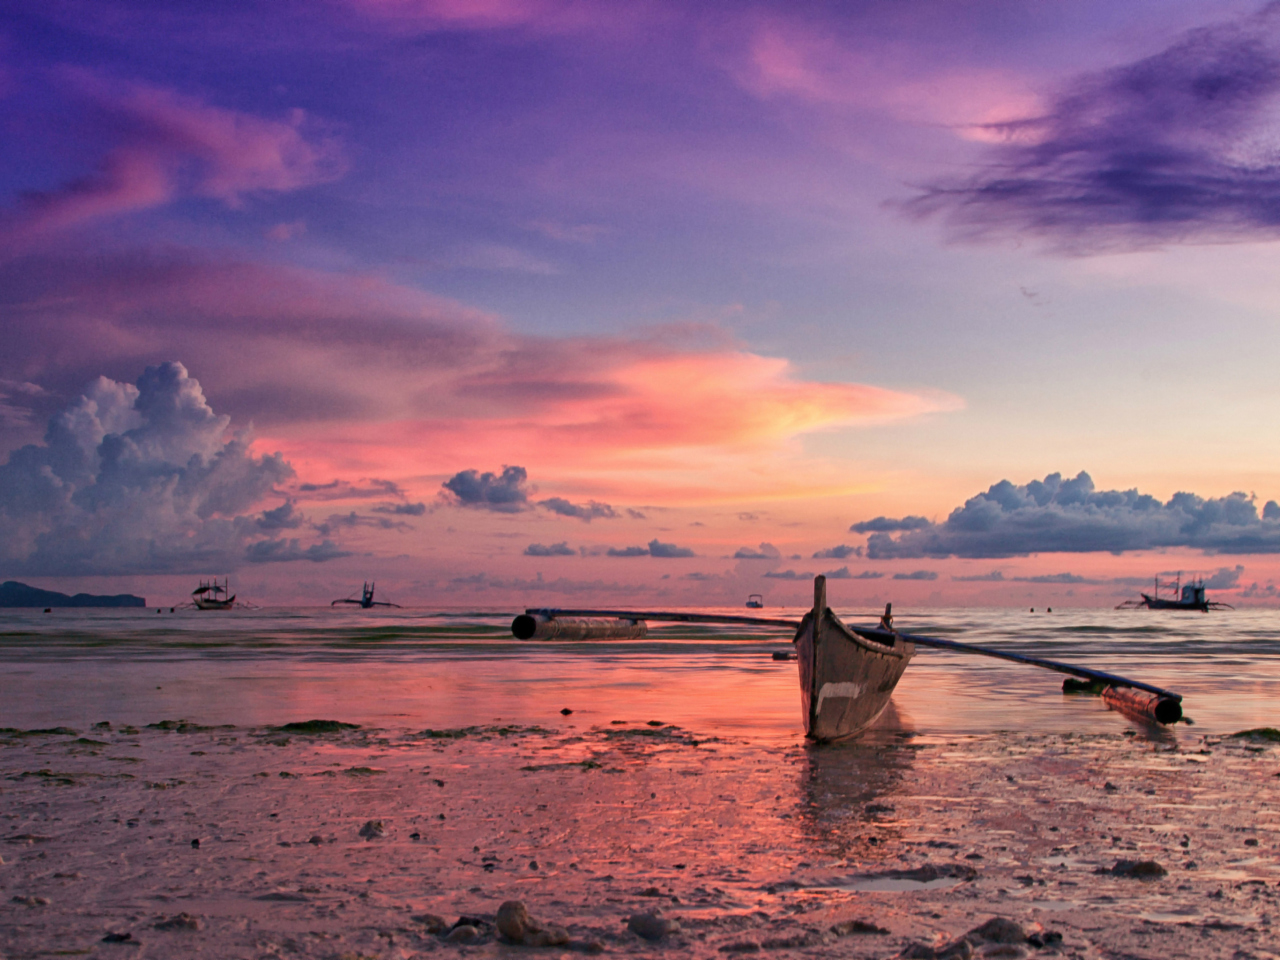 Das Pink Sunset And Boat At Beach In Philippines Wallpaper 1280x960